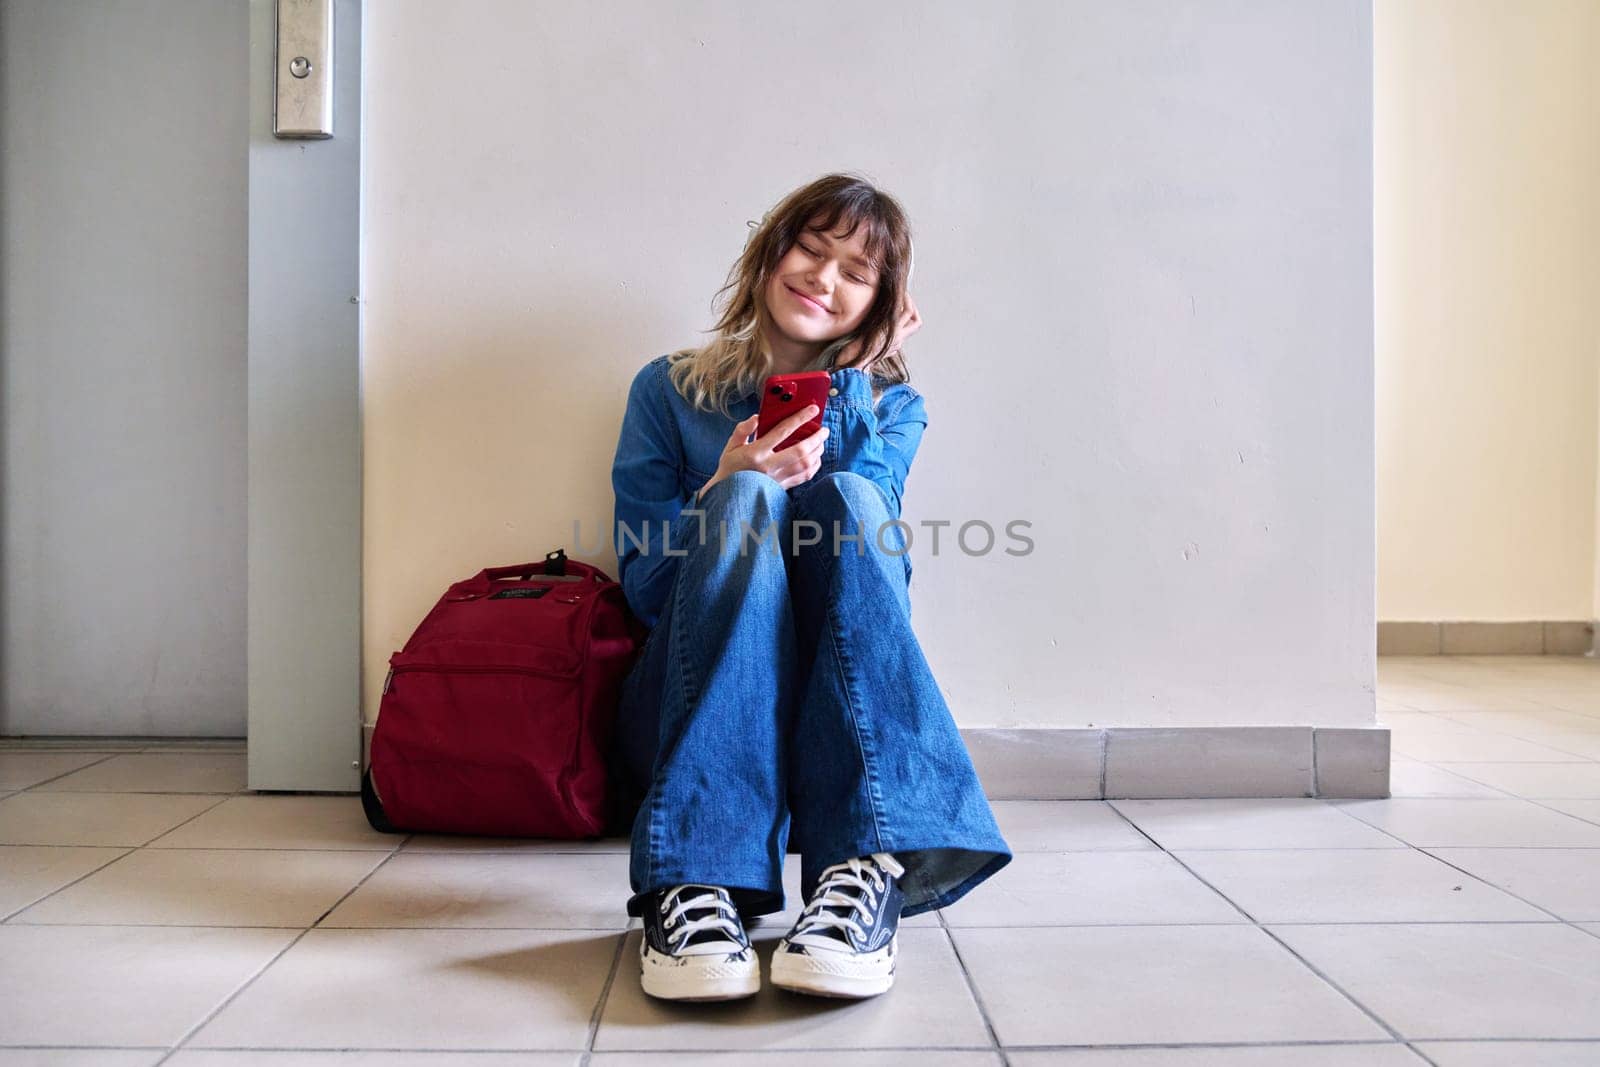 Happy teenage girl in headphones enjoying music with closed eyes. Young female student with backpack sitting on floor near elevator. Music, joy, happiness, youth, young people concept